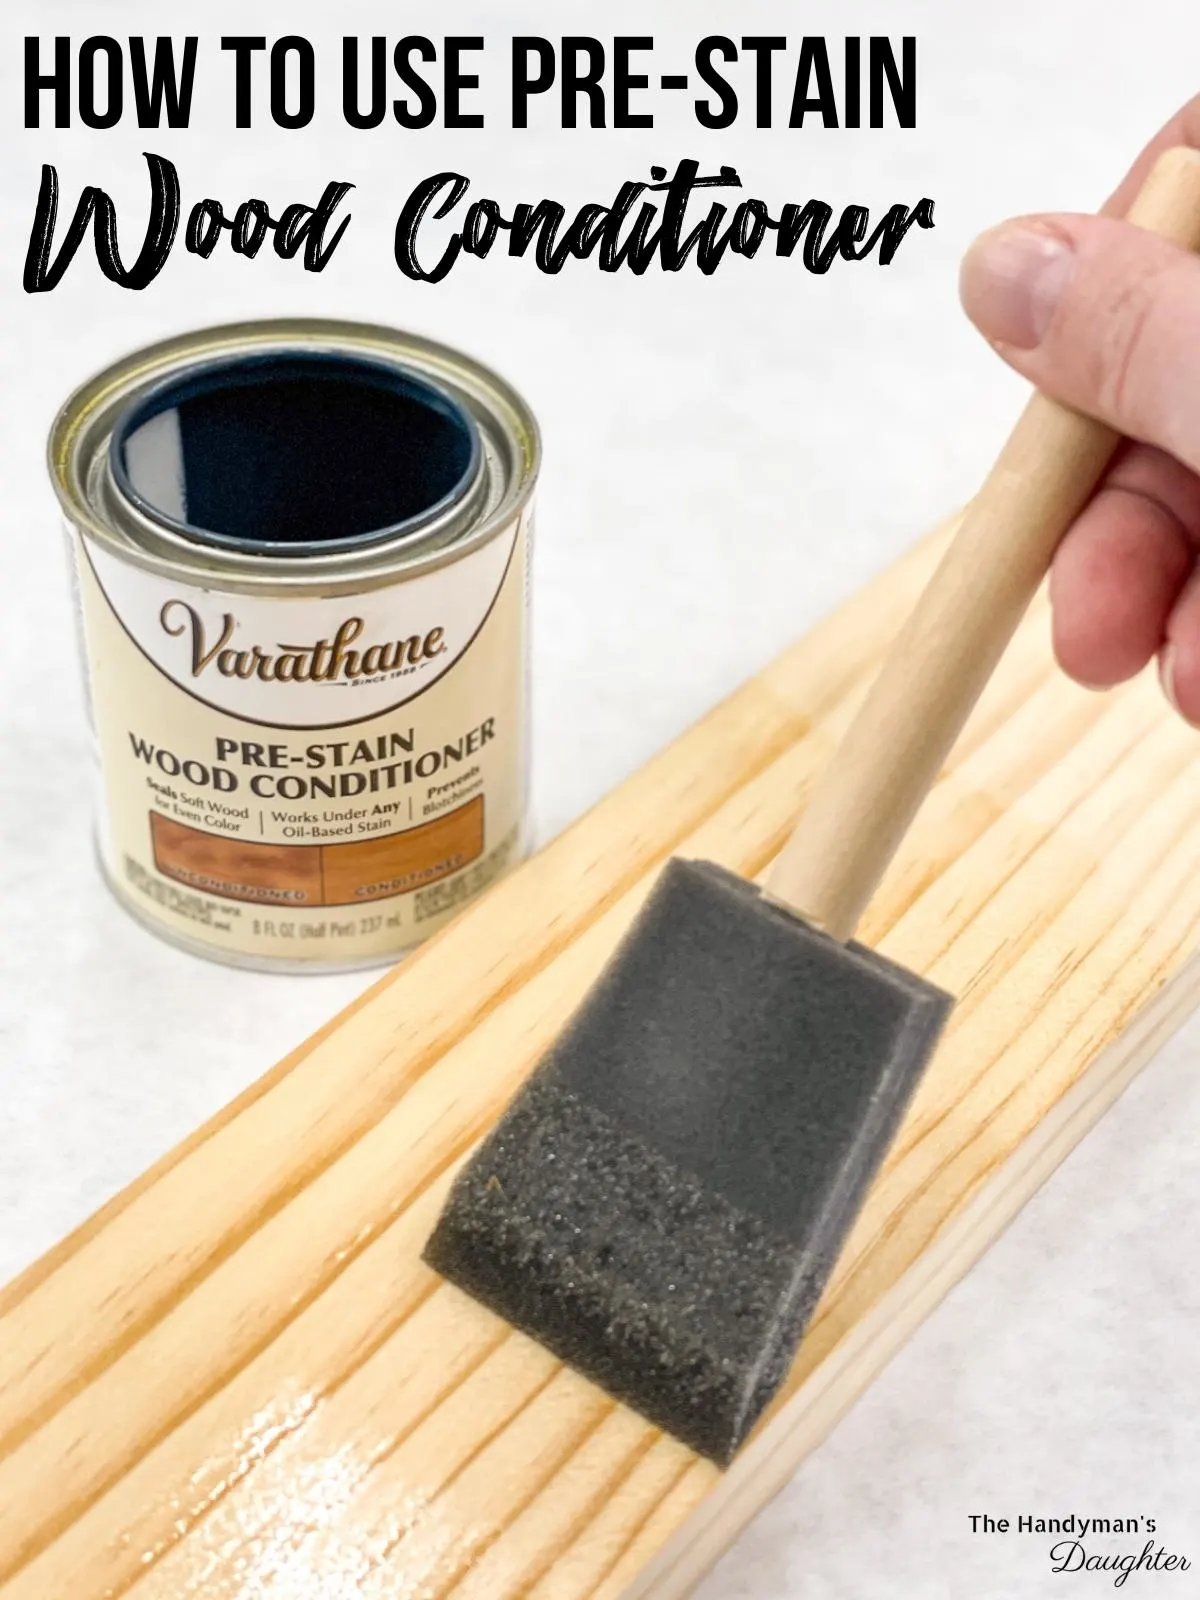 How to make DIY Colored Wood Stain 